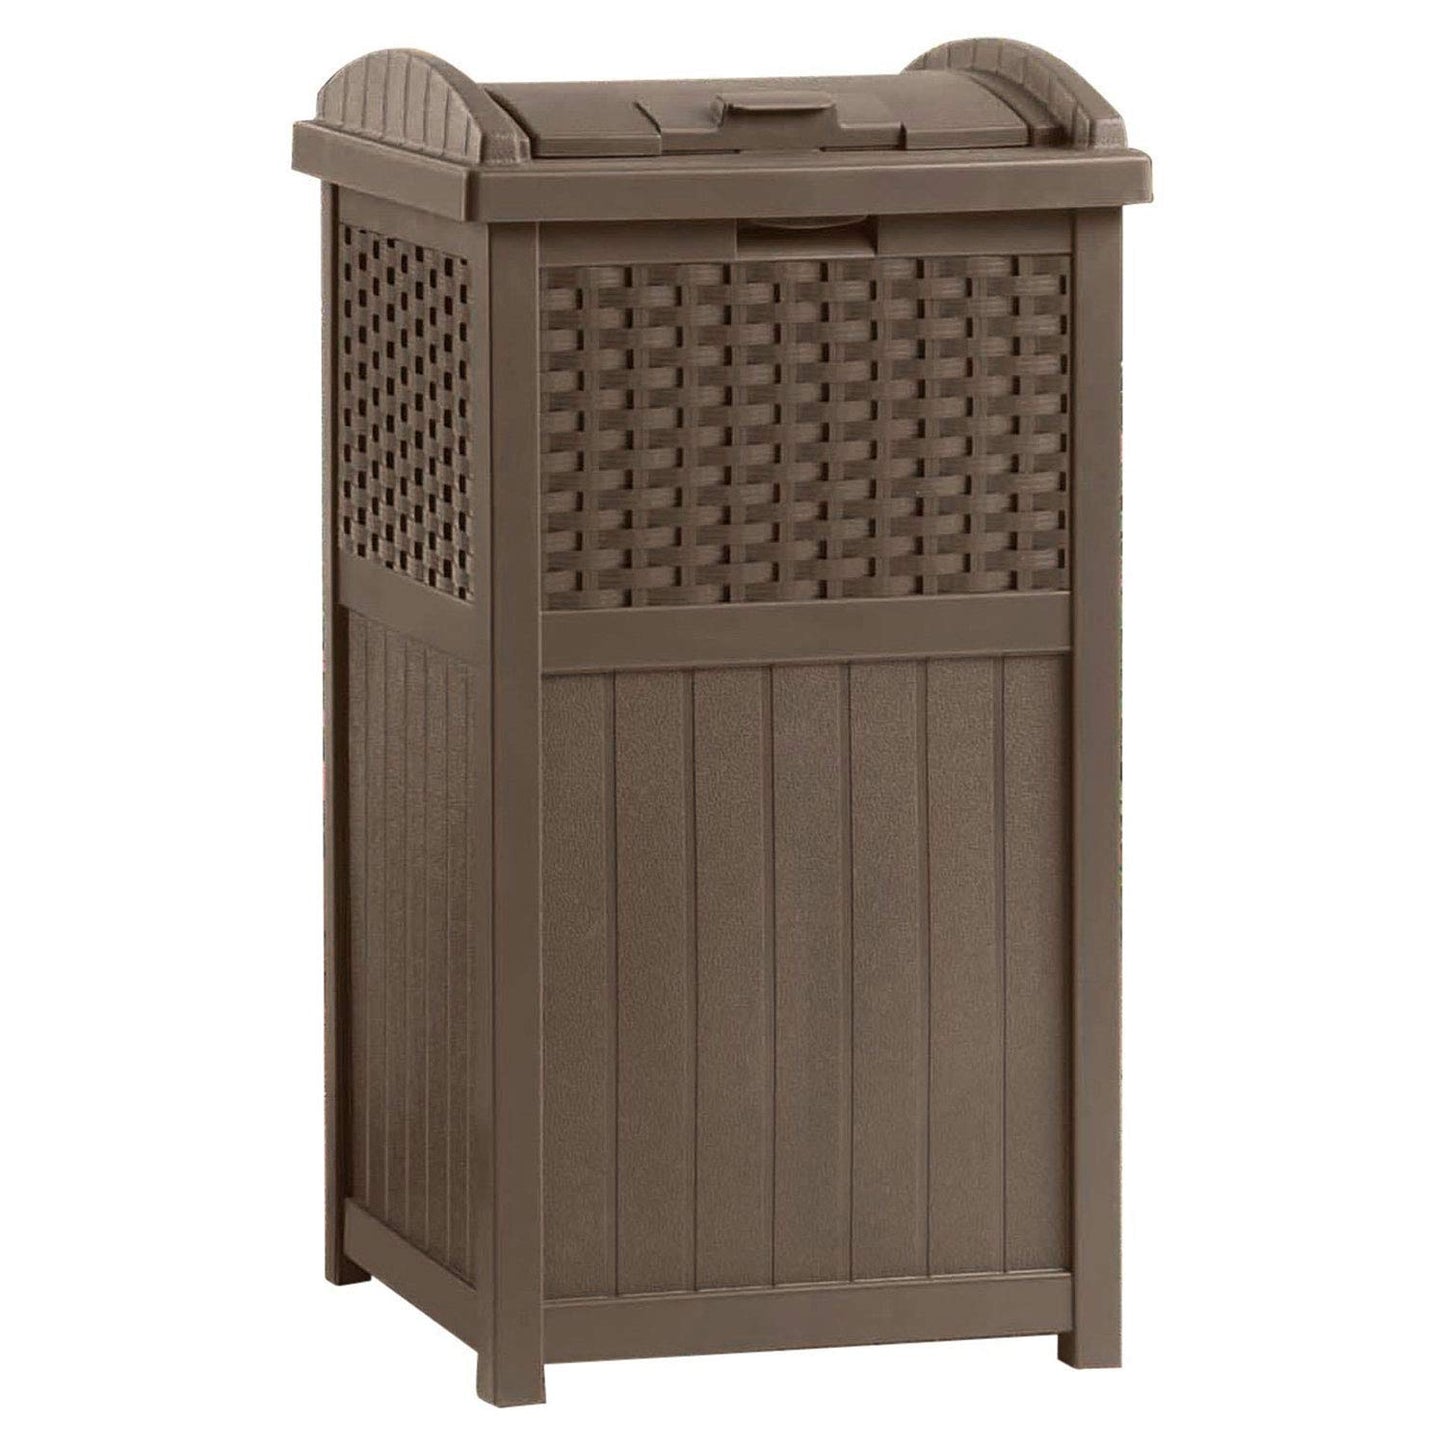 Suncast Trash Hideaway 33 Gallon Resin Wicker Outdoor Garbage Container (8 Pack) 8 Pack Brown